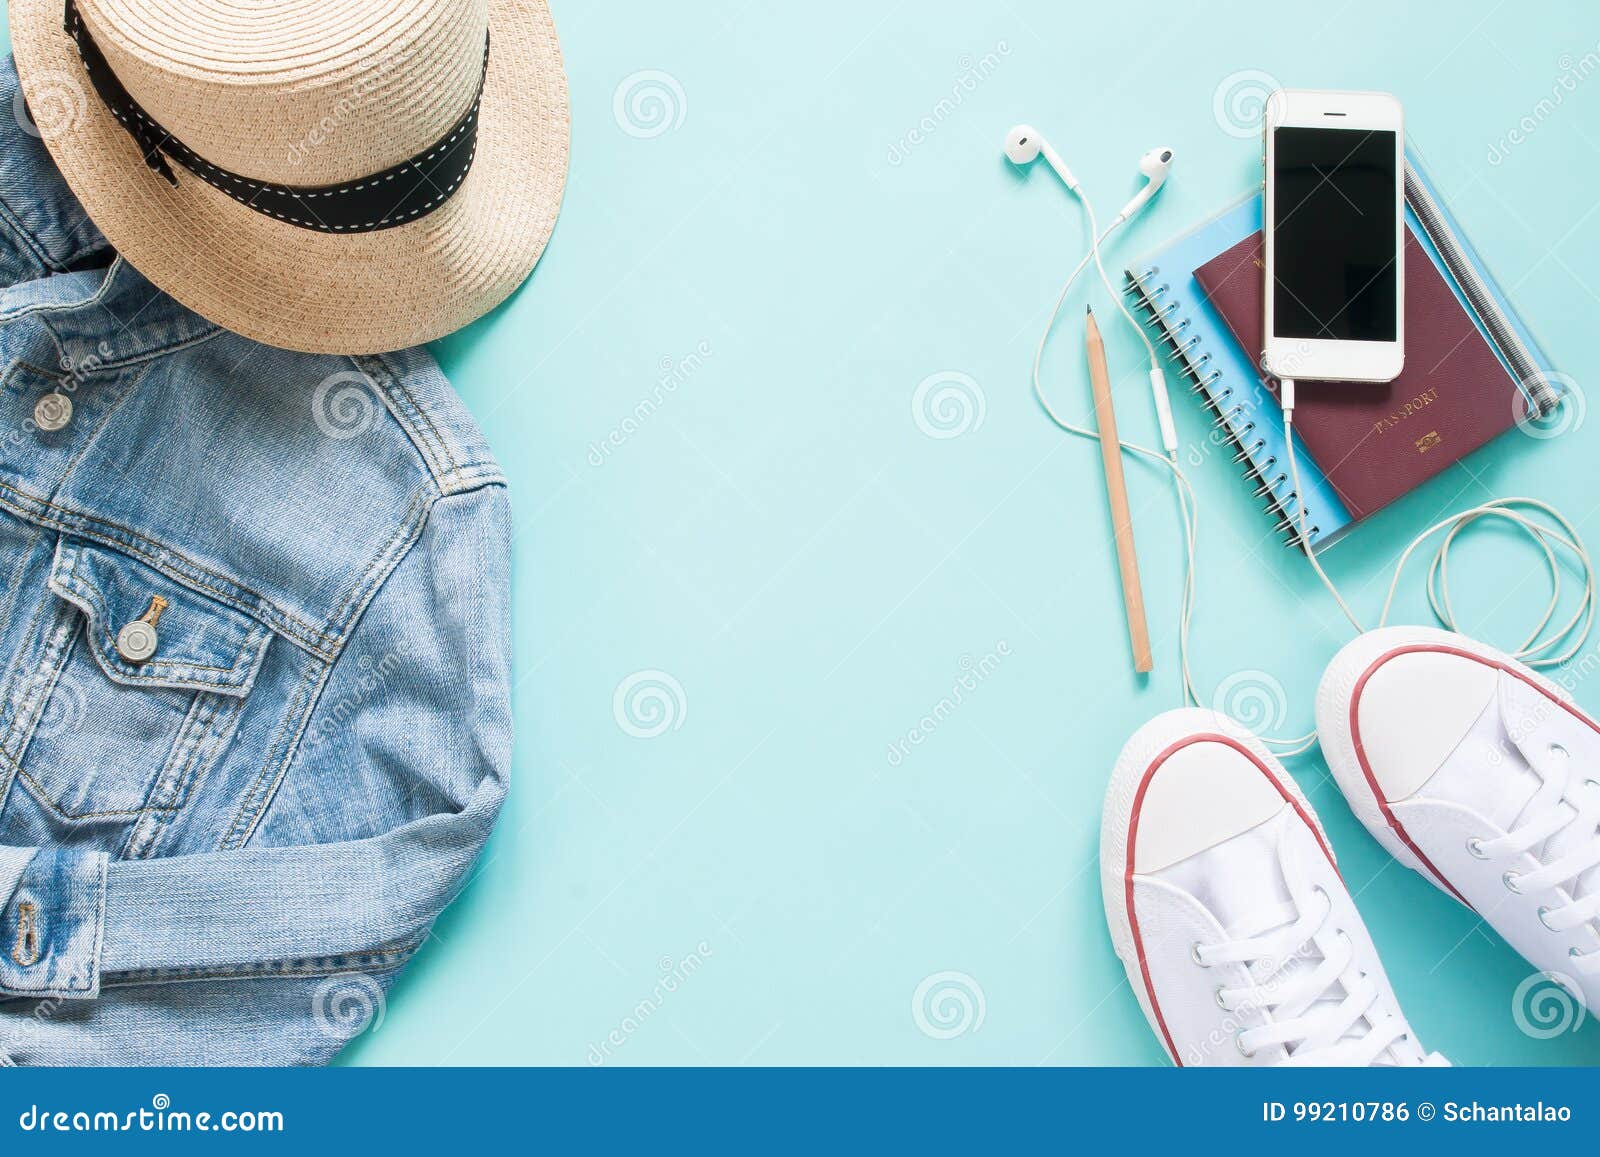 Flat Lay of Tourist Items with Mobile Device, Passport and Clothing on ...